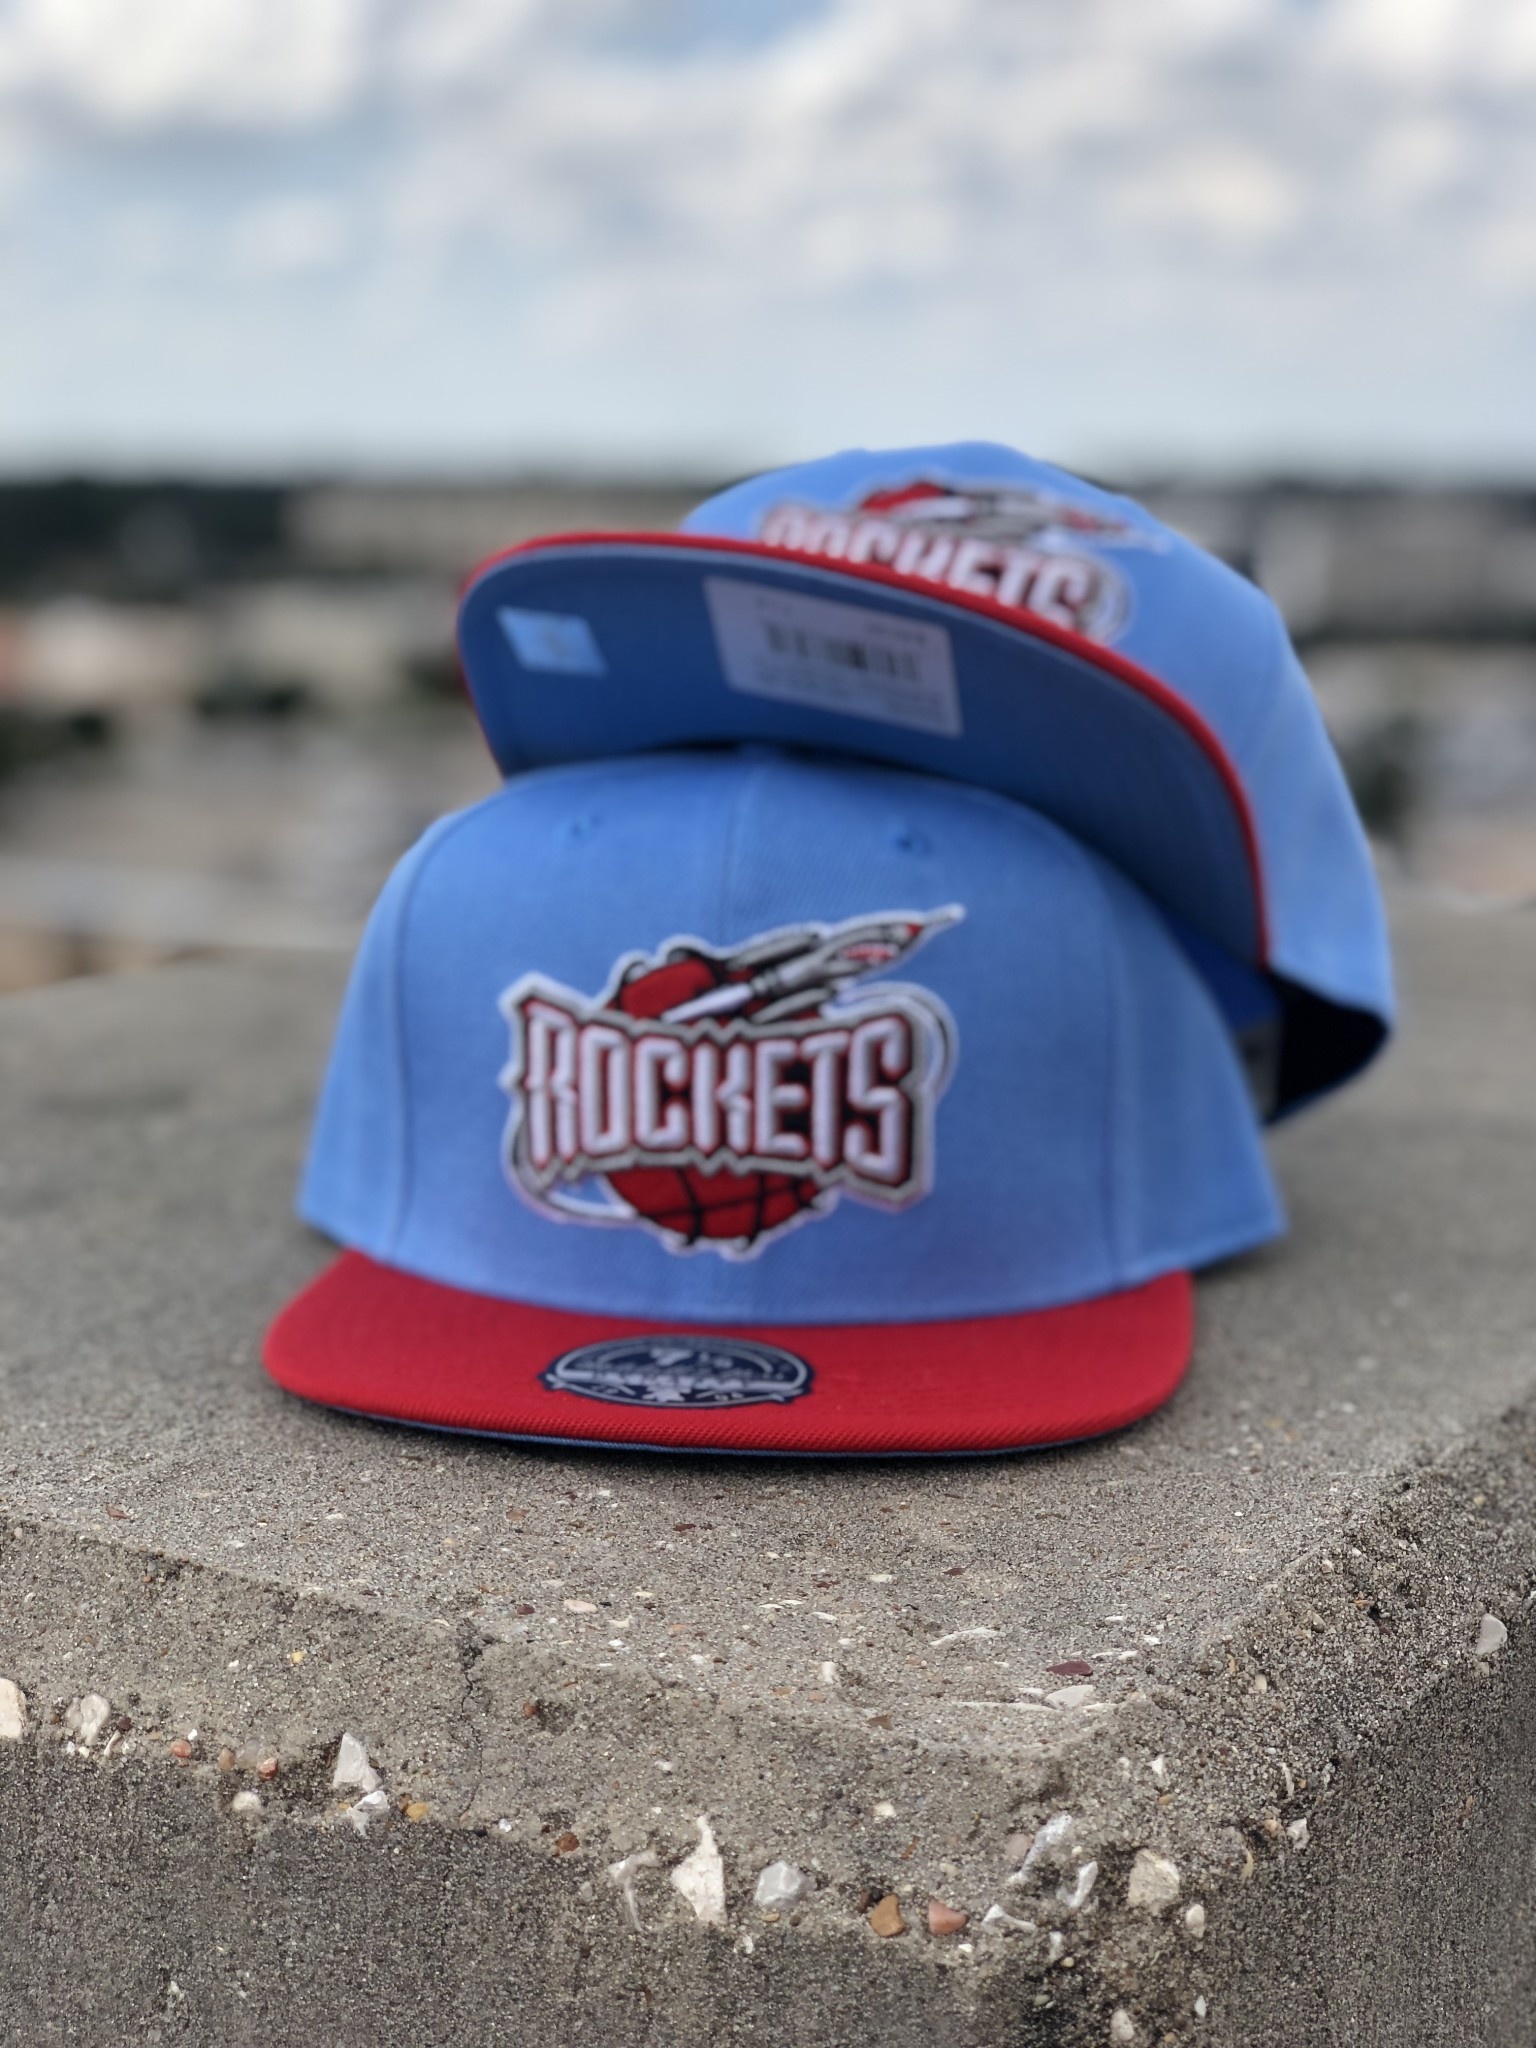 Lids - The Mitchell & Ness NBA Reload Collection features